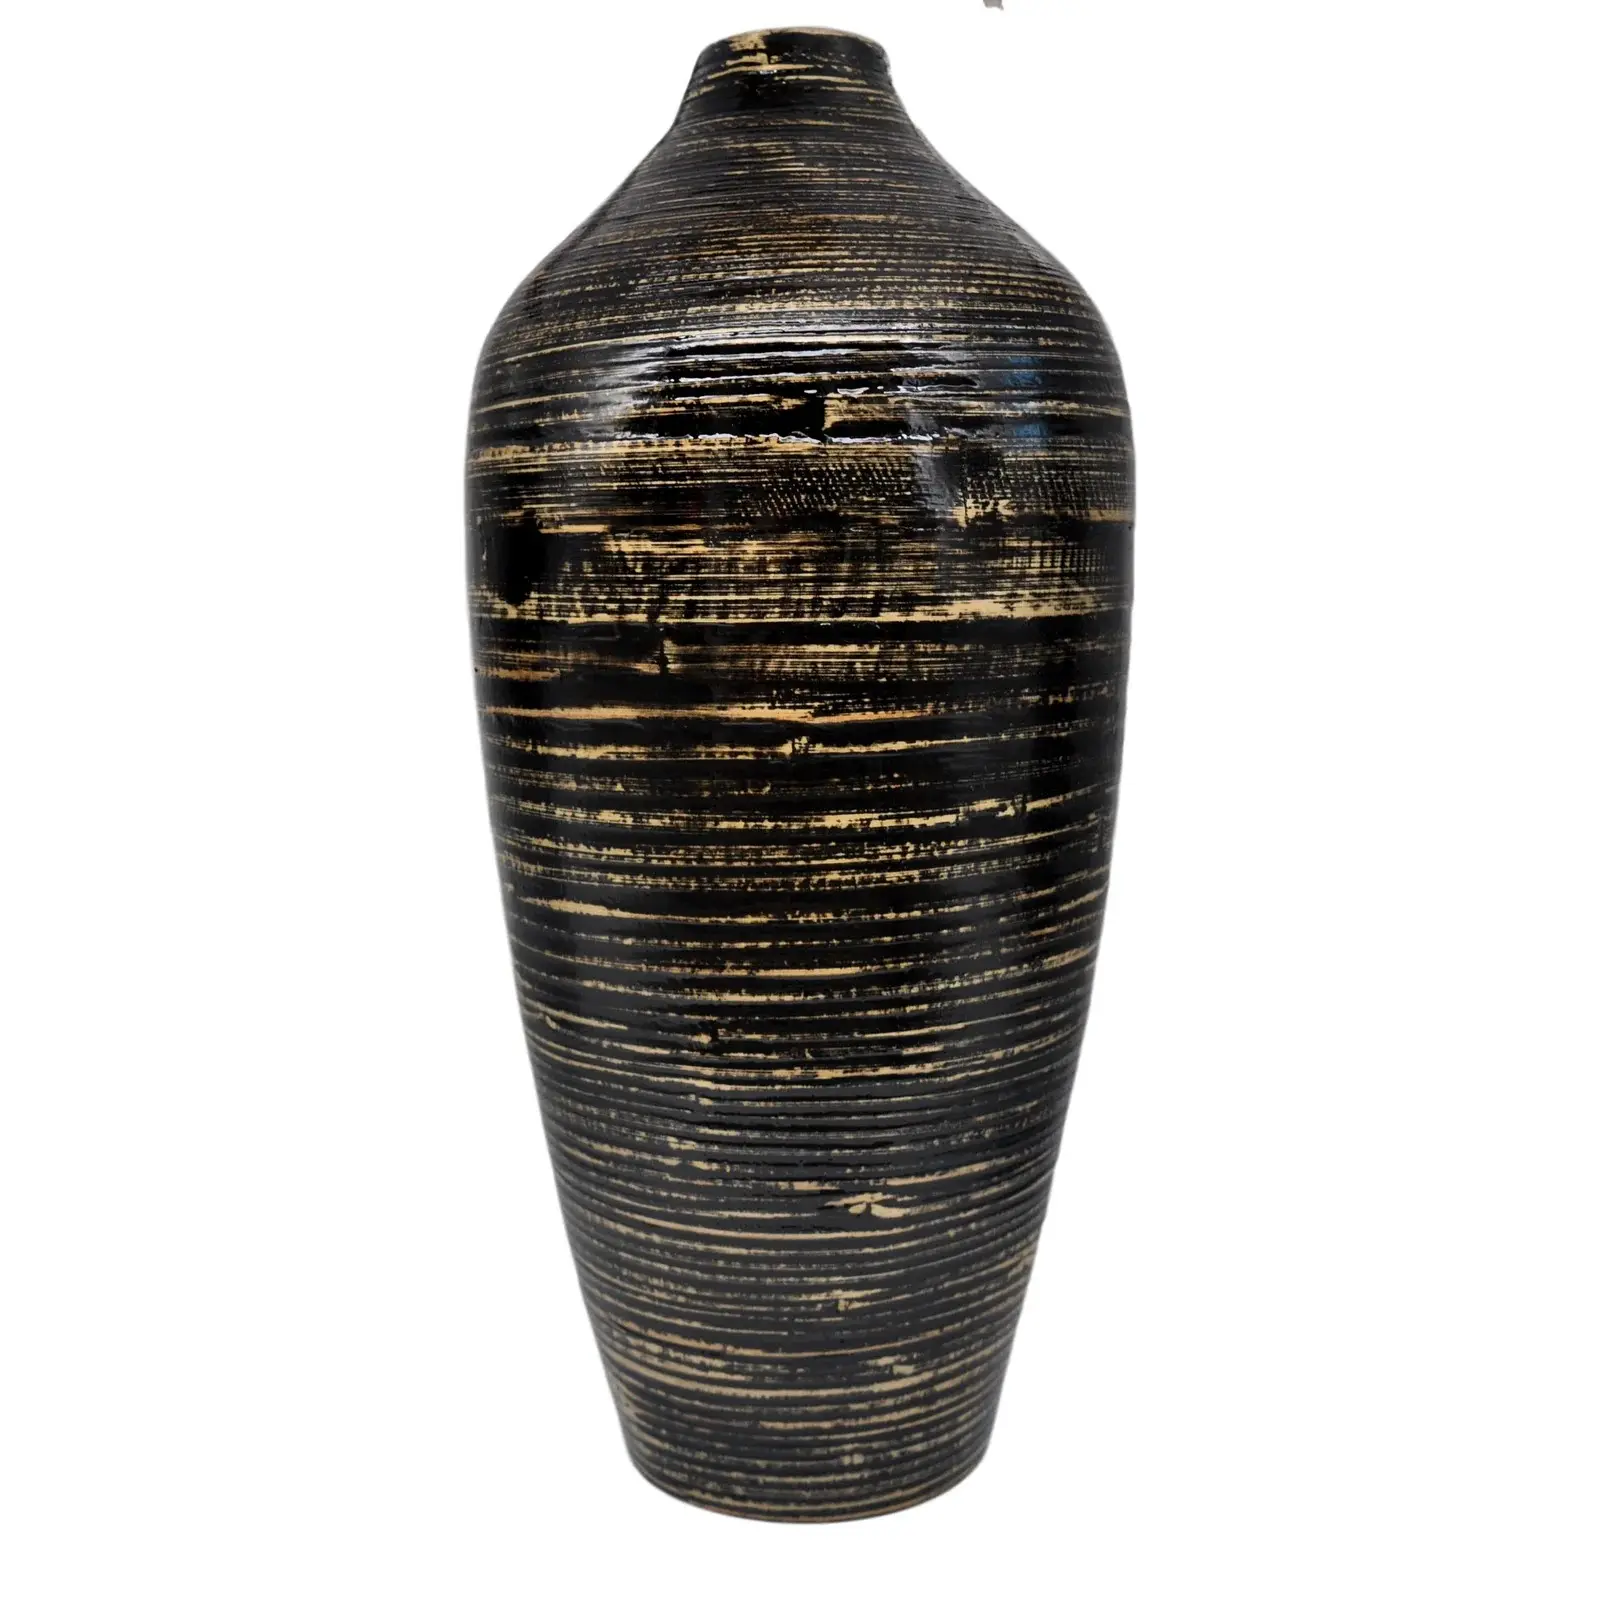 Best Collection Spun Bamboo Vases For Flowers Glass Customize Size Color Home Bedroom Furniture